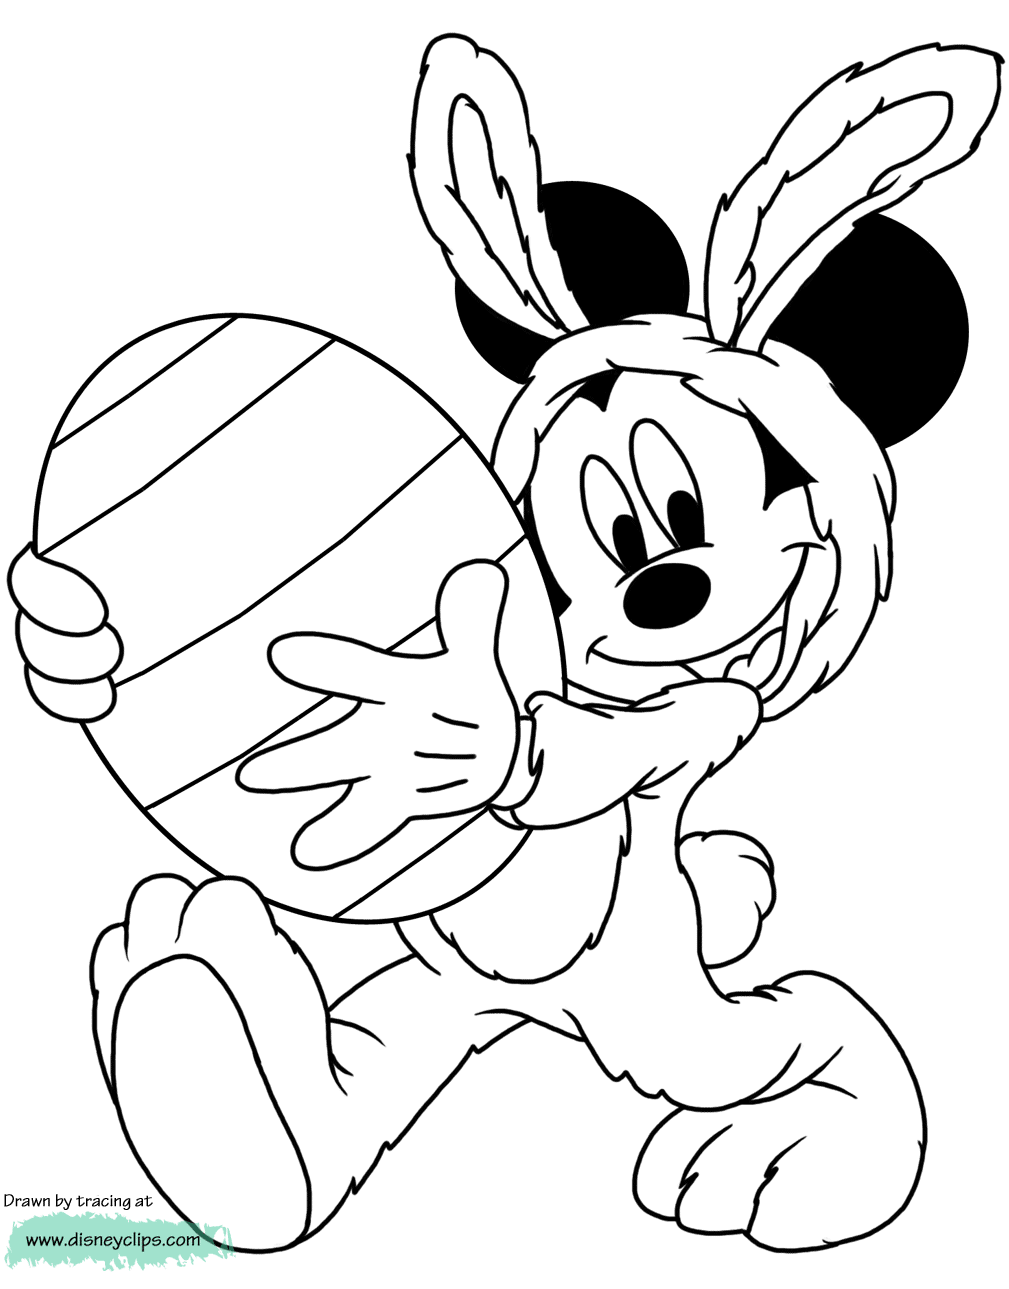 easter coloring sheets free printable free printable easter coloring sheet for little kids the easter sheets printable free coloring 